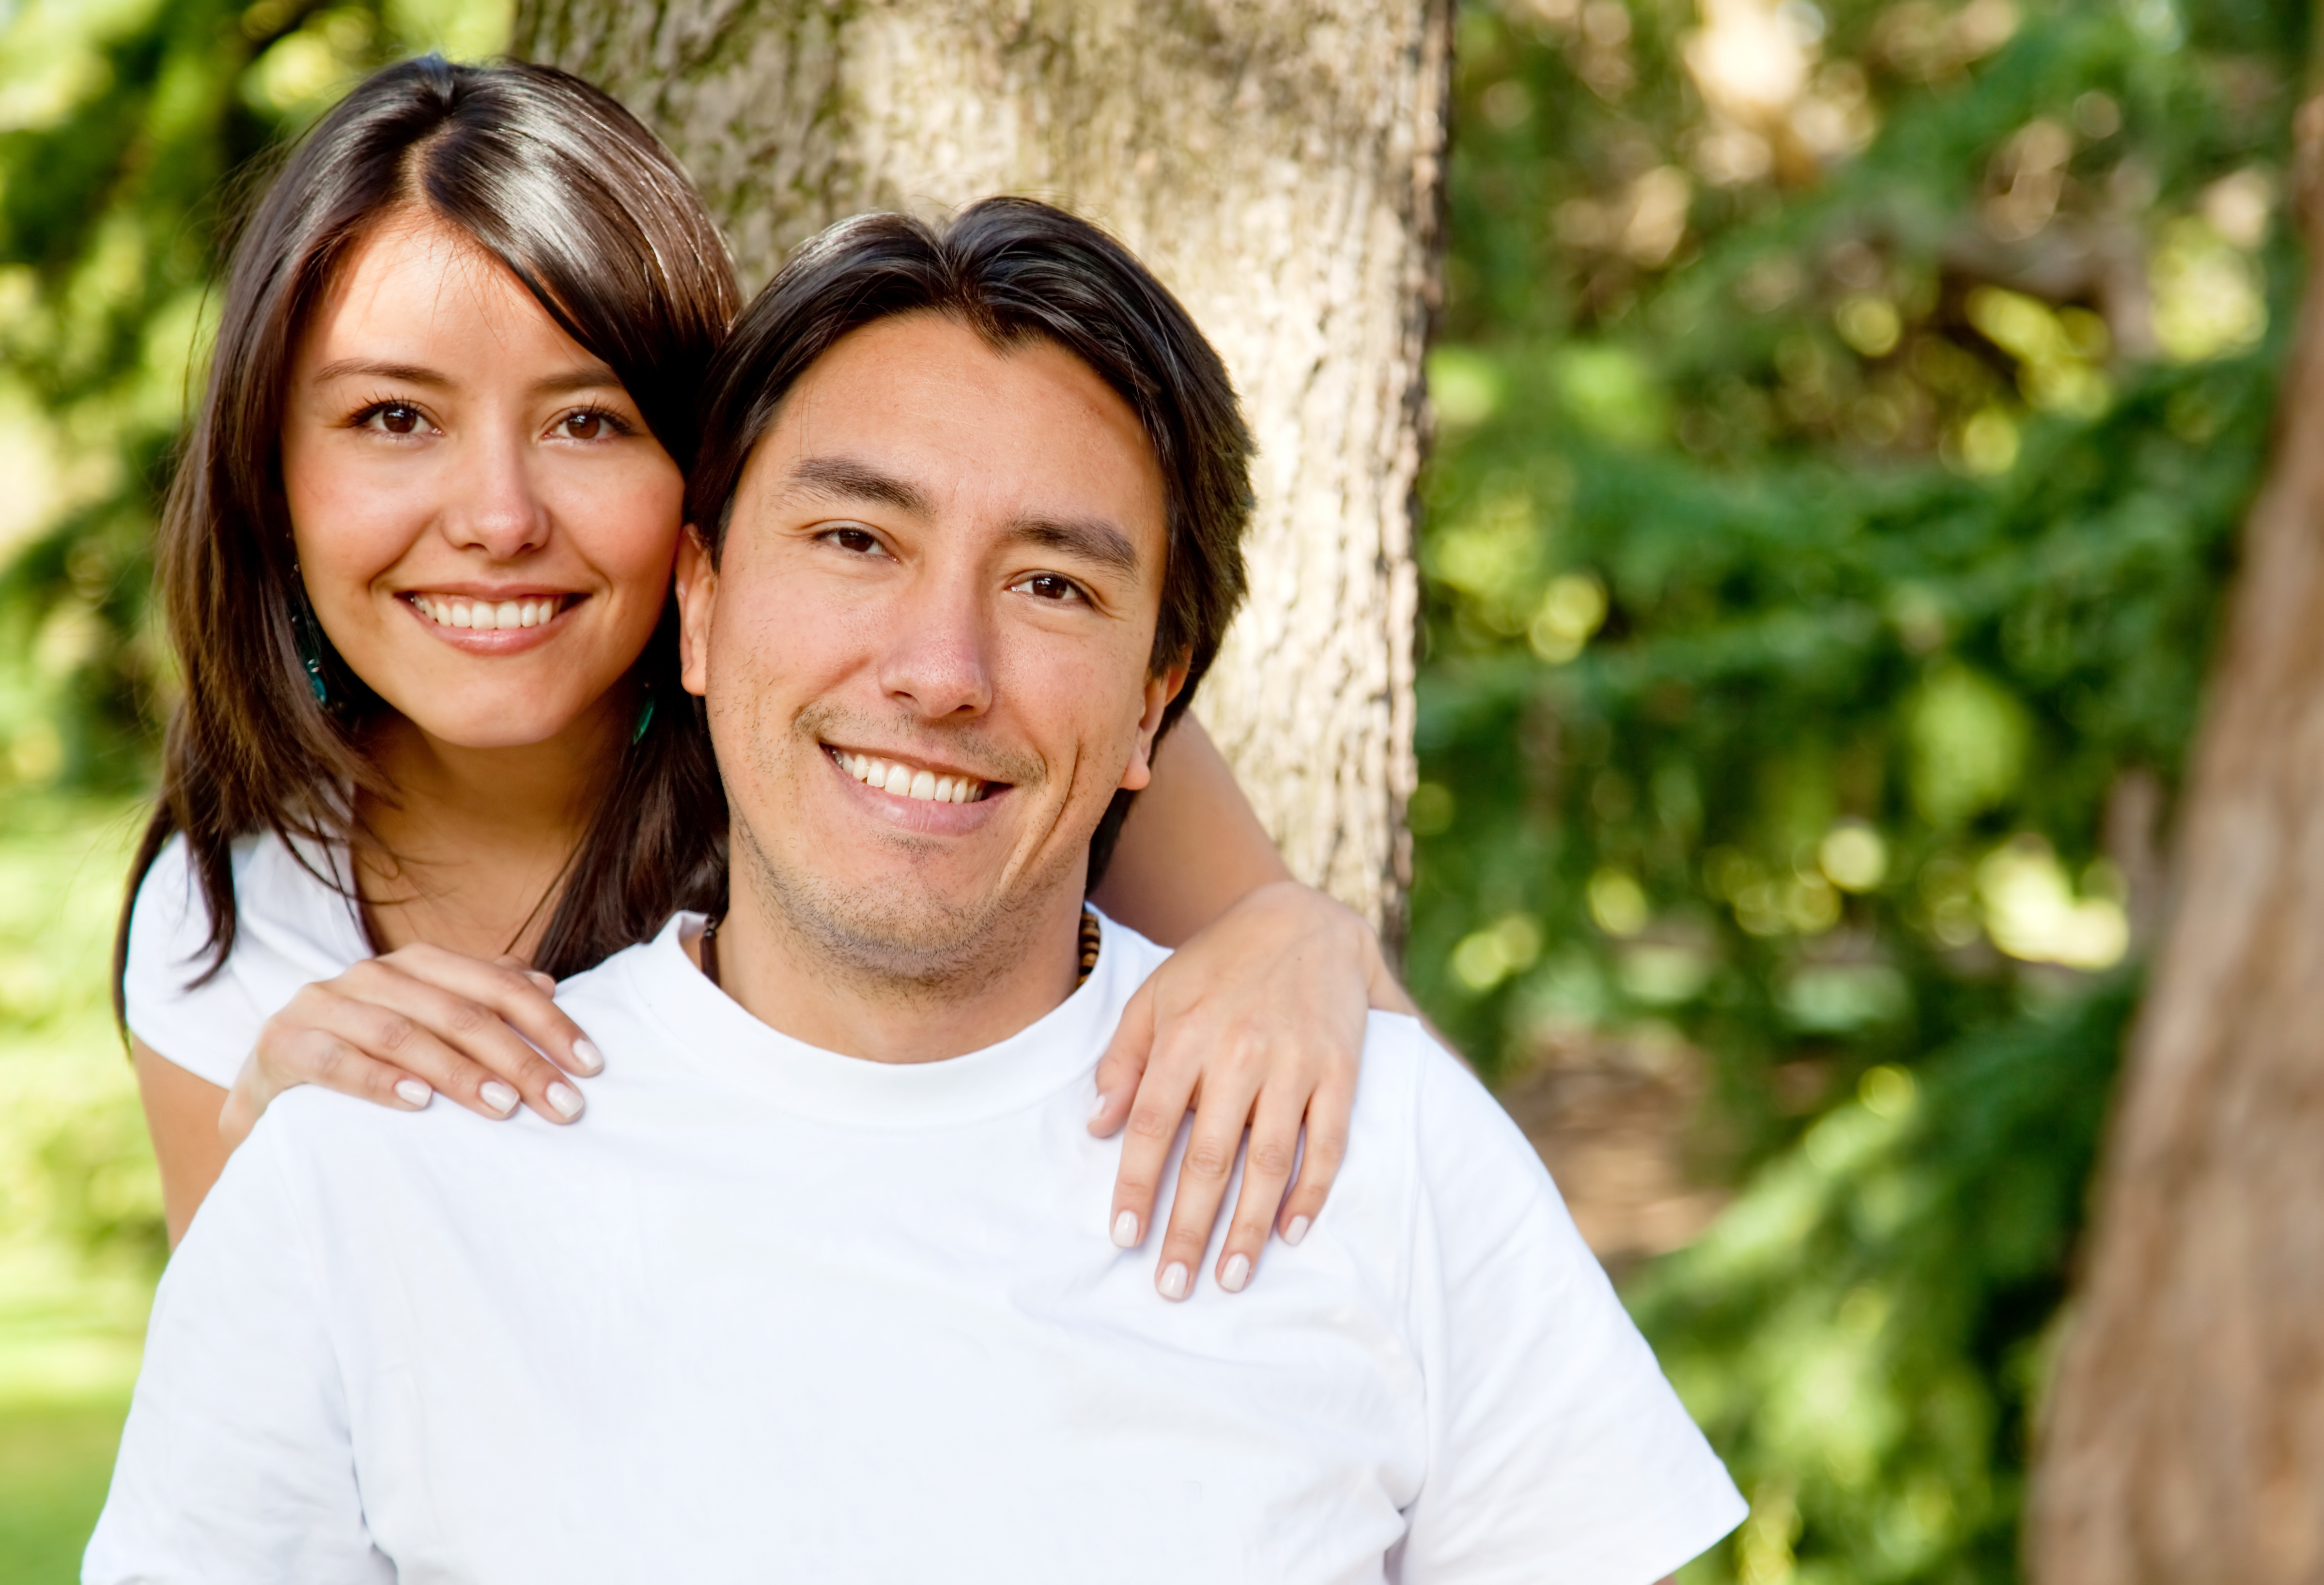 Portrait of man and woman smiling outdoors